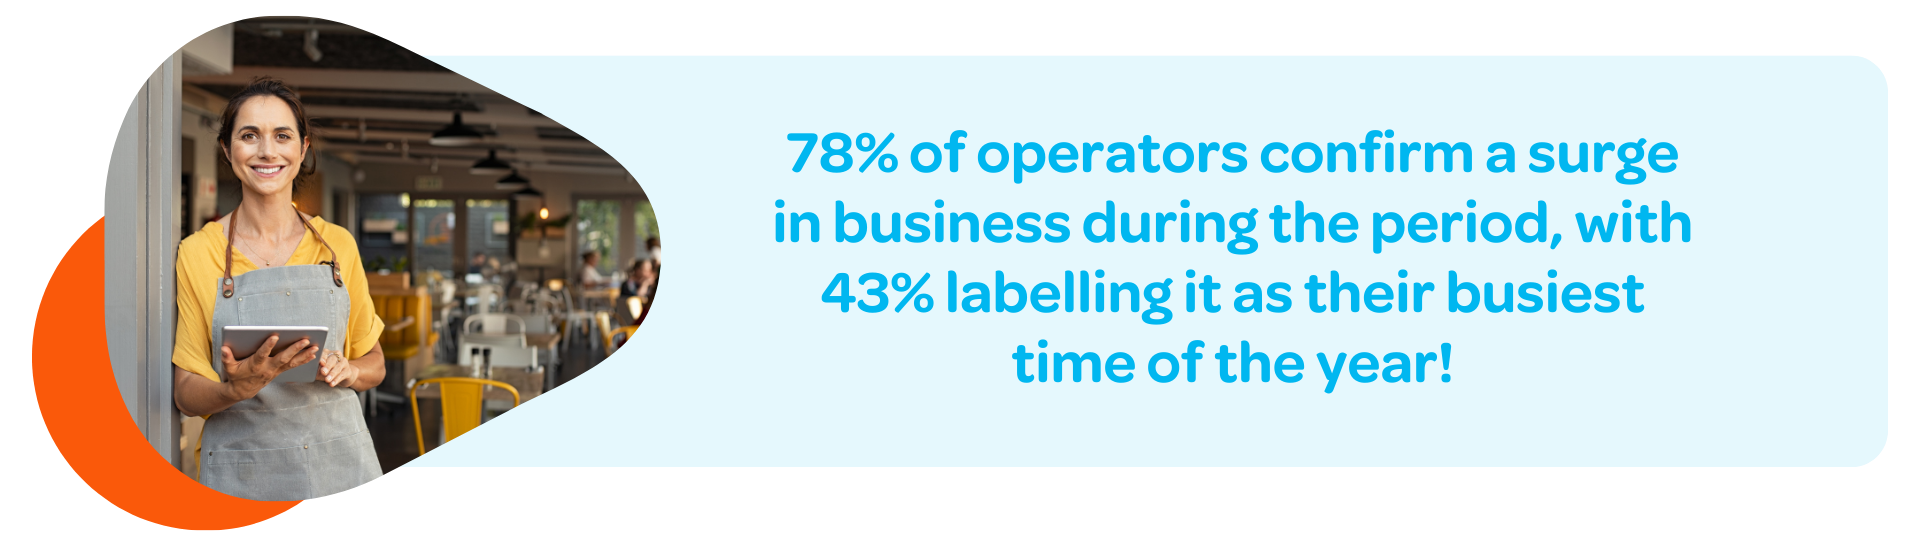 78% of operators confirm a surge in business during the period, with 43% labelling it as their busiest time of the year!